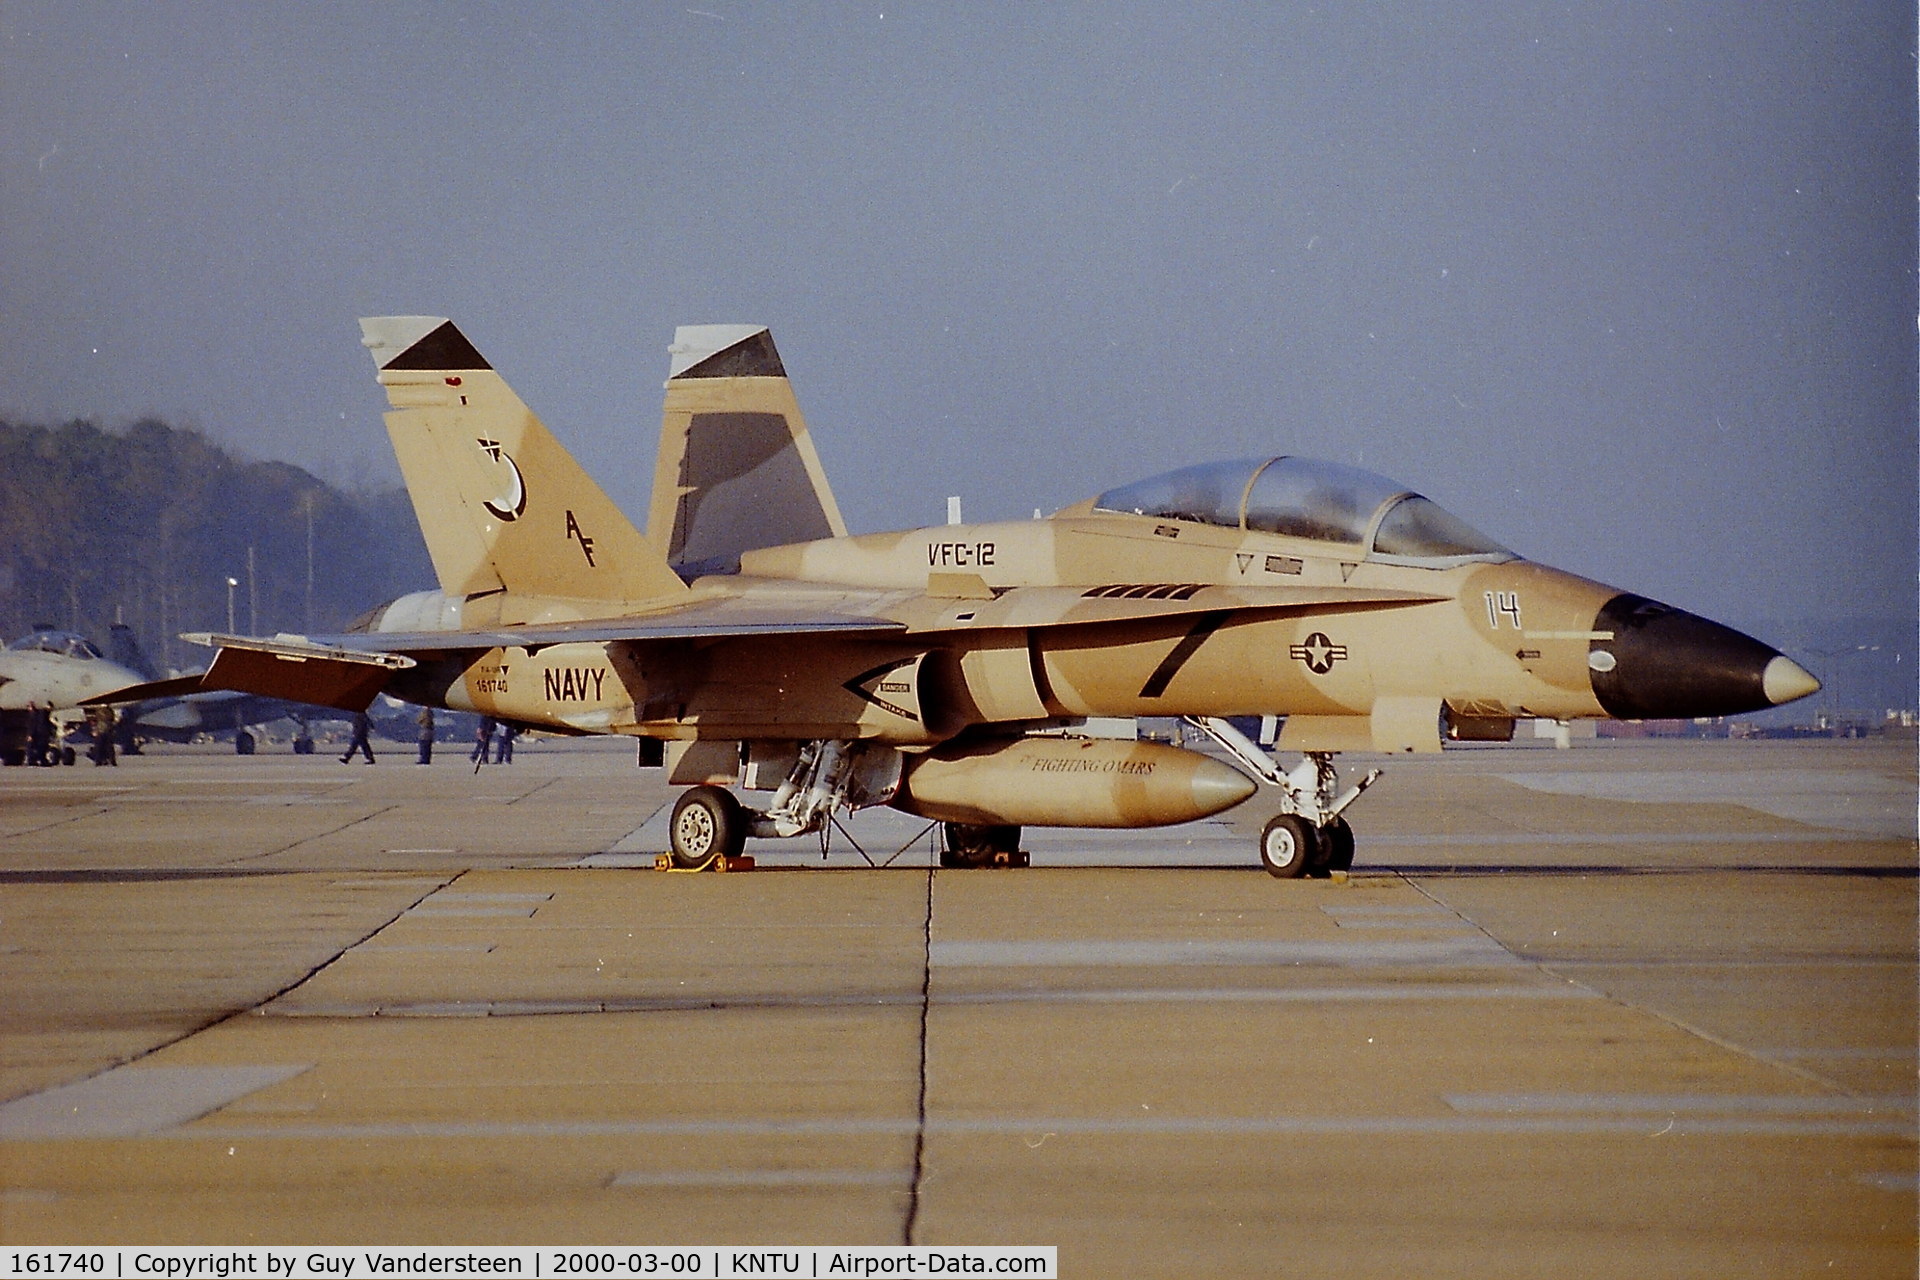 161740, McDonnell Douglas F/A-18B Hornet C/N 0095, 161740 at KNTU in the morning march 2000